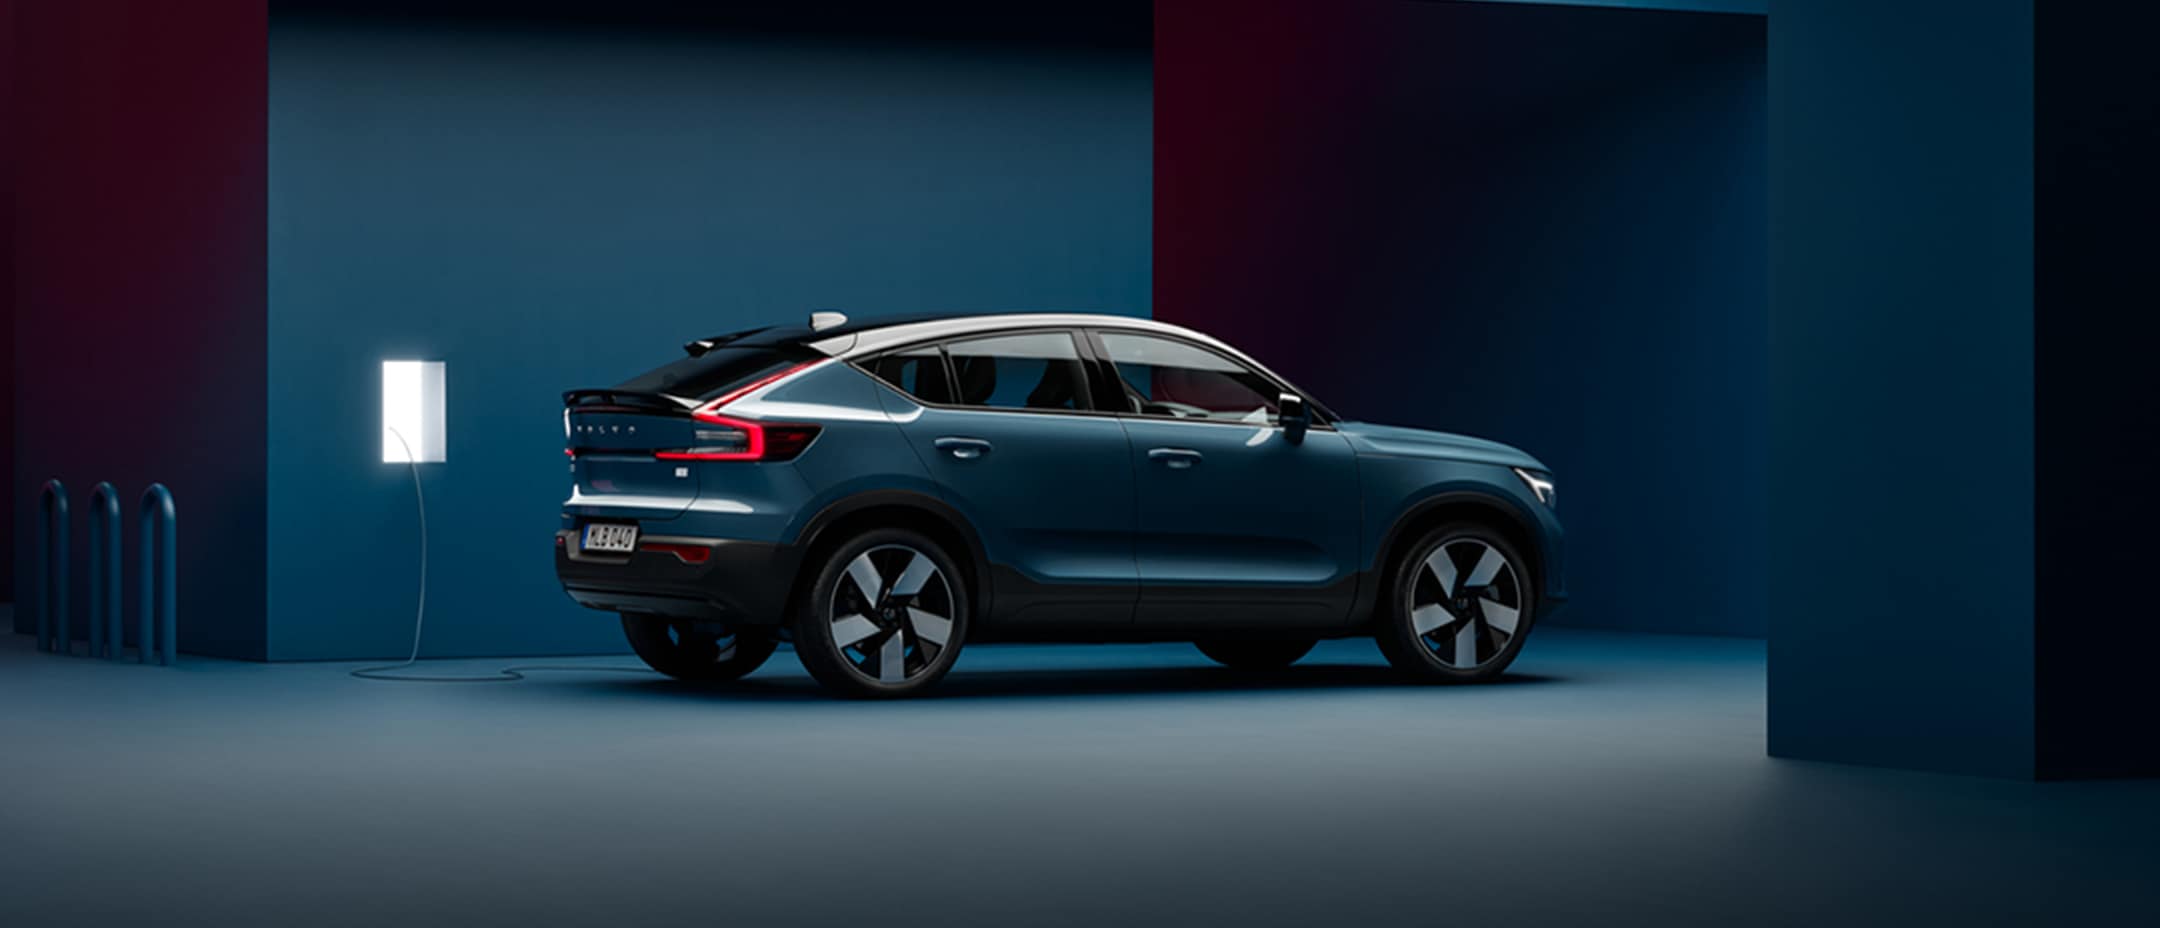 The new pure electric Volvo C40